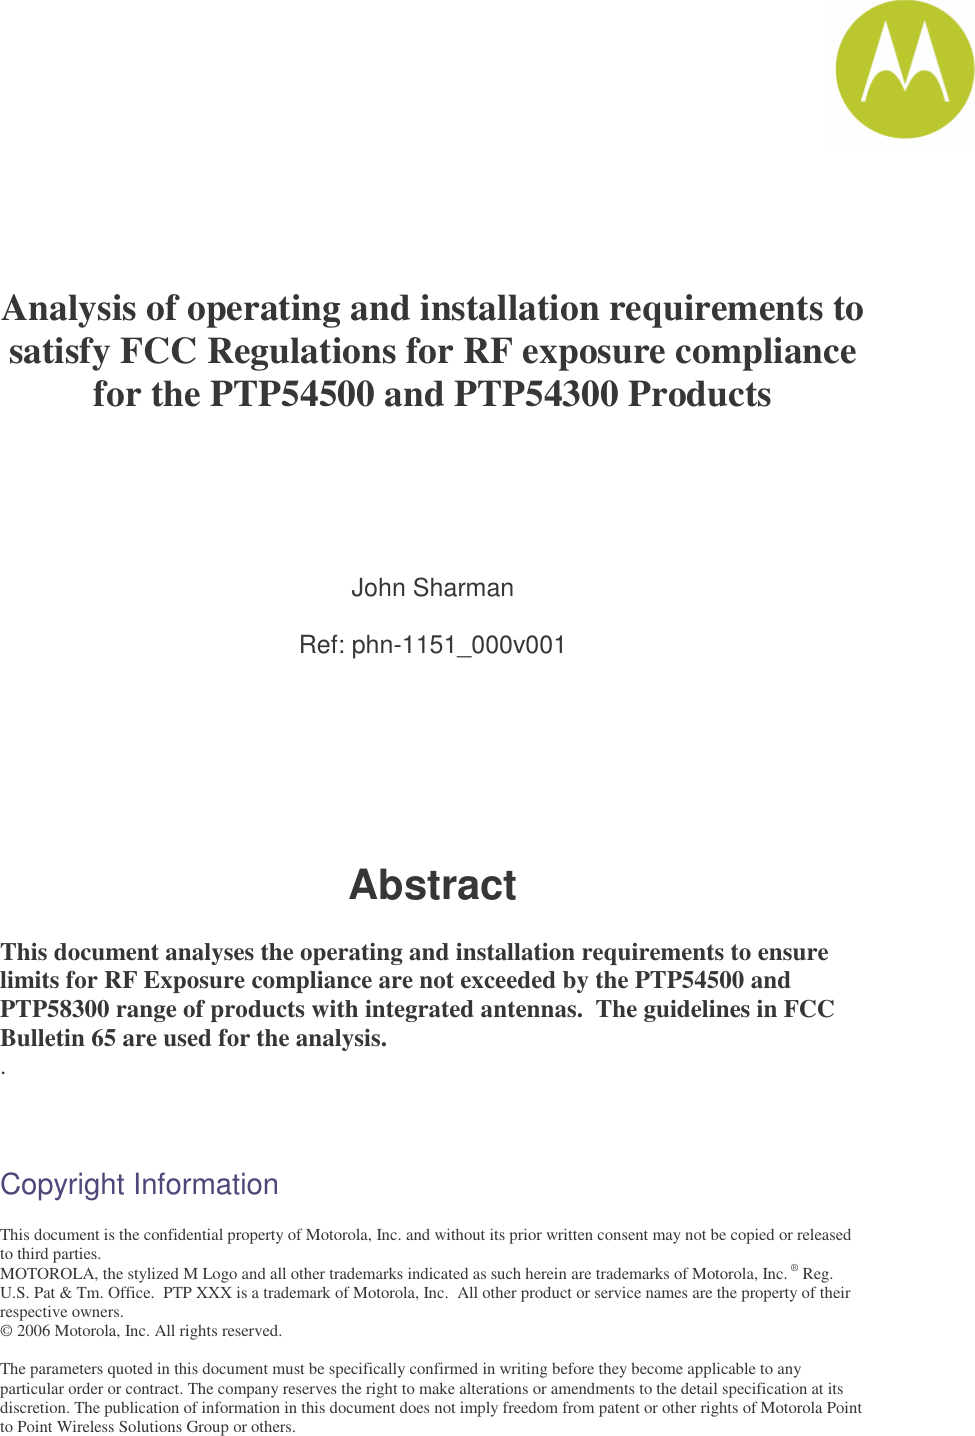       Analysis of operating and installation requirements to satisfy FCC Regulations for RF exposure compliance for the PTP54500 and PTP54300 Products     John Sharman  Ref: phn-1151_000v001        Abstract  This document analyses the operating and installation requirements to ensure limits for RF Exposure compliance are not exceeded by the PTP54500 and PTP58300 range of products with integrated antennas.  The guidelines in FCC Bulletin 65 are used for the analysis. .    Copyright Information  This document is the confidential property of Motorola, Inc. and without its prior written consent may not be copied or released to third parties.  MOTOROLA, the stylized M Logo and all other trademarks indicated as such herein are trademarks of Motorola, Inc. ® Reg. U.S. Pat &amp; Tm. Office.  PTP XXX is a trademark of Motorola, Inc.  All other product or service names are the property of their respective owners. © 2006 Motorola, Inc. All rights reserved.  The parameters quoted in this document must be specifically confirmed in writing before they become applicable to any particular order or contract. The company reserves the right to make alterations or amendments to the detail specification at its discretion. The publication of information in this document does not imply freedom from patent or other rights of Motorola Point to Point Wireless Solutions Group or others. 